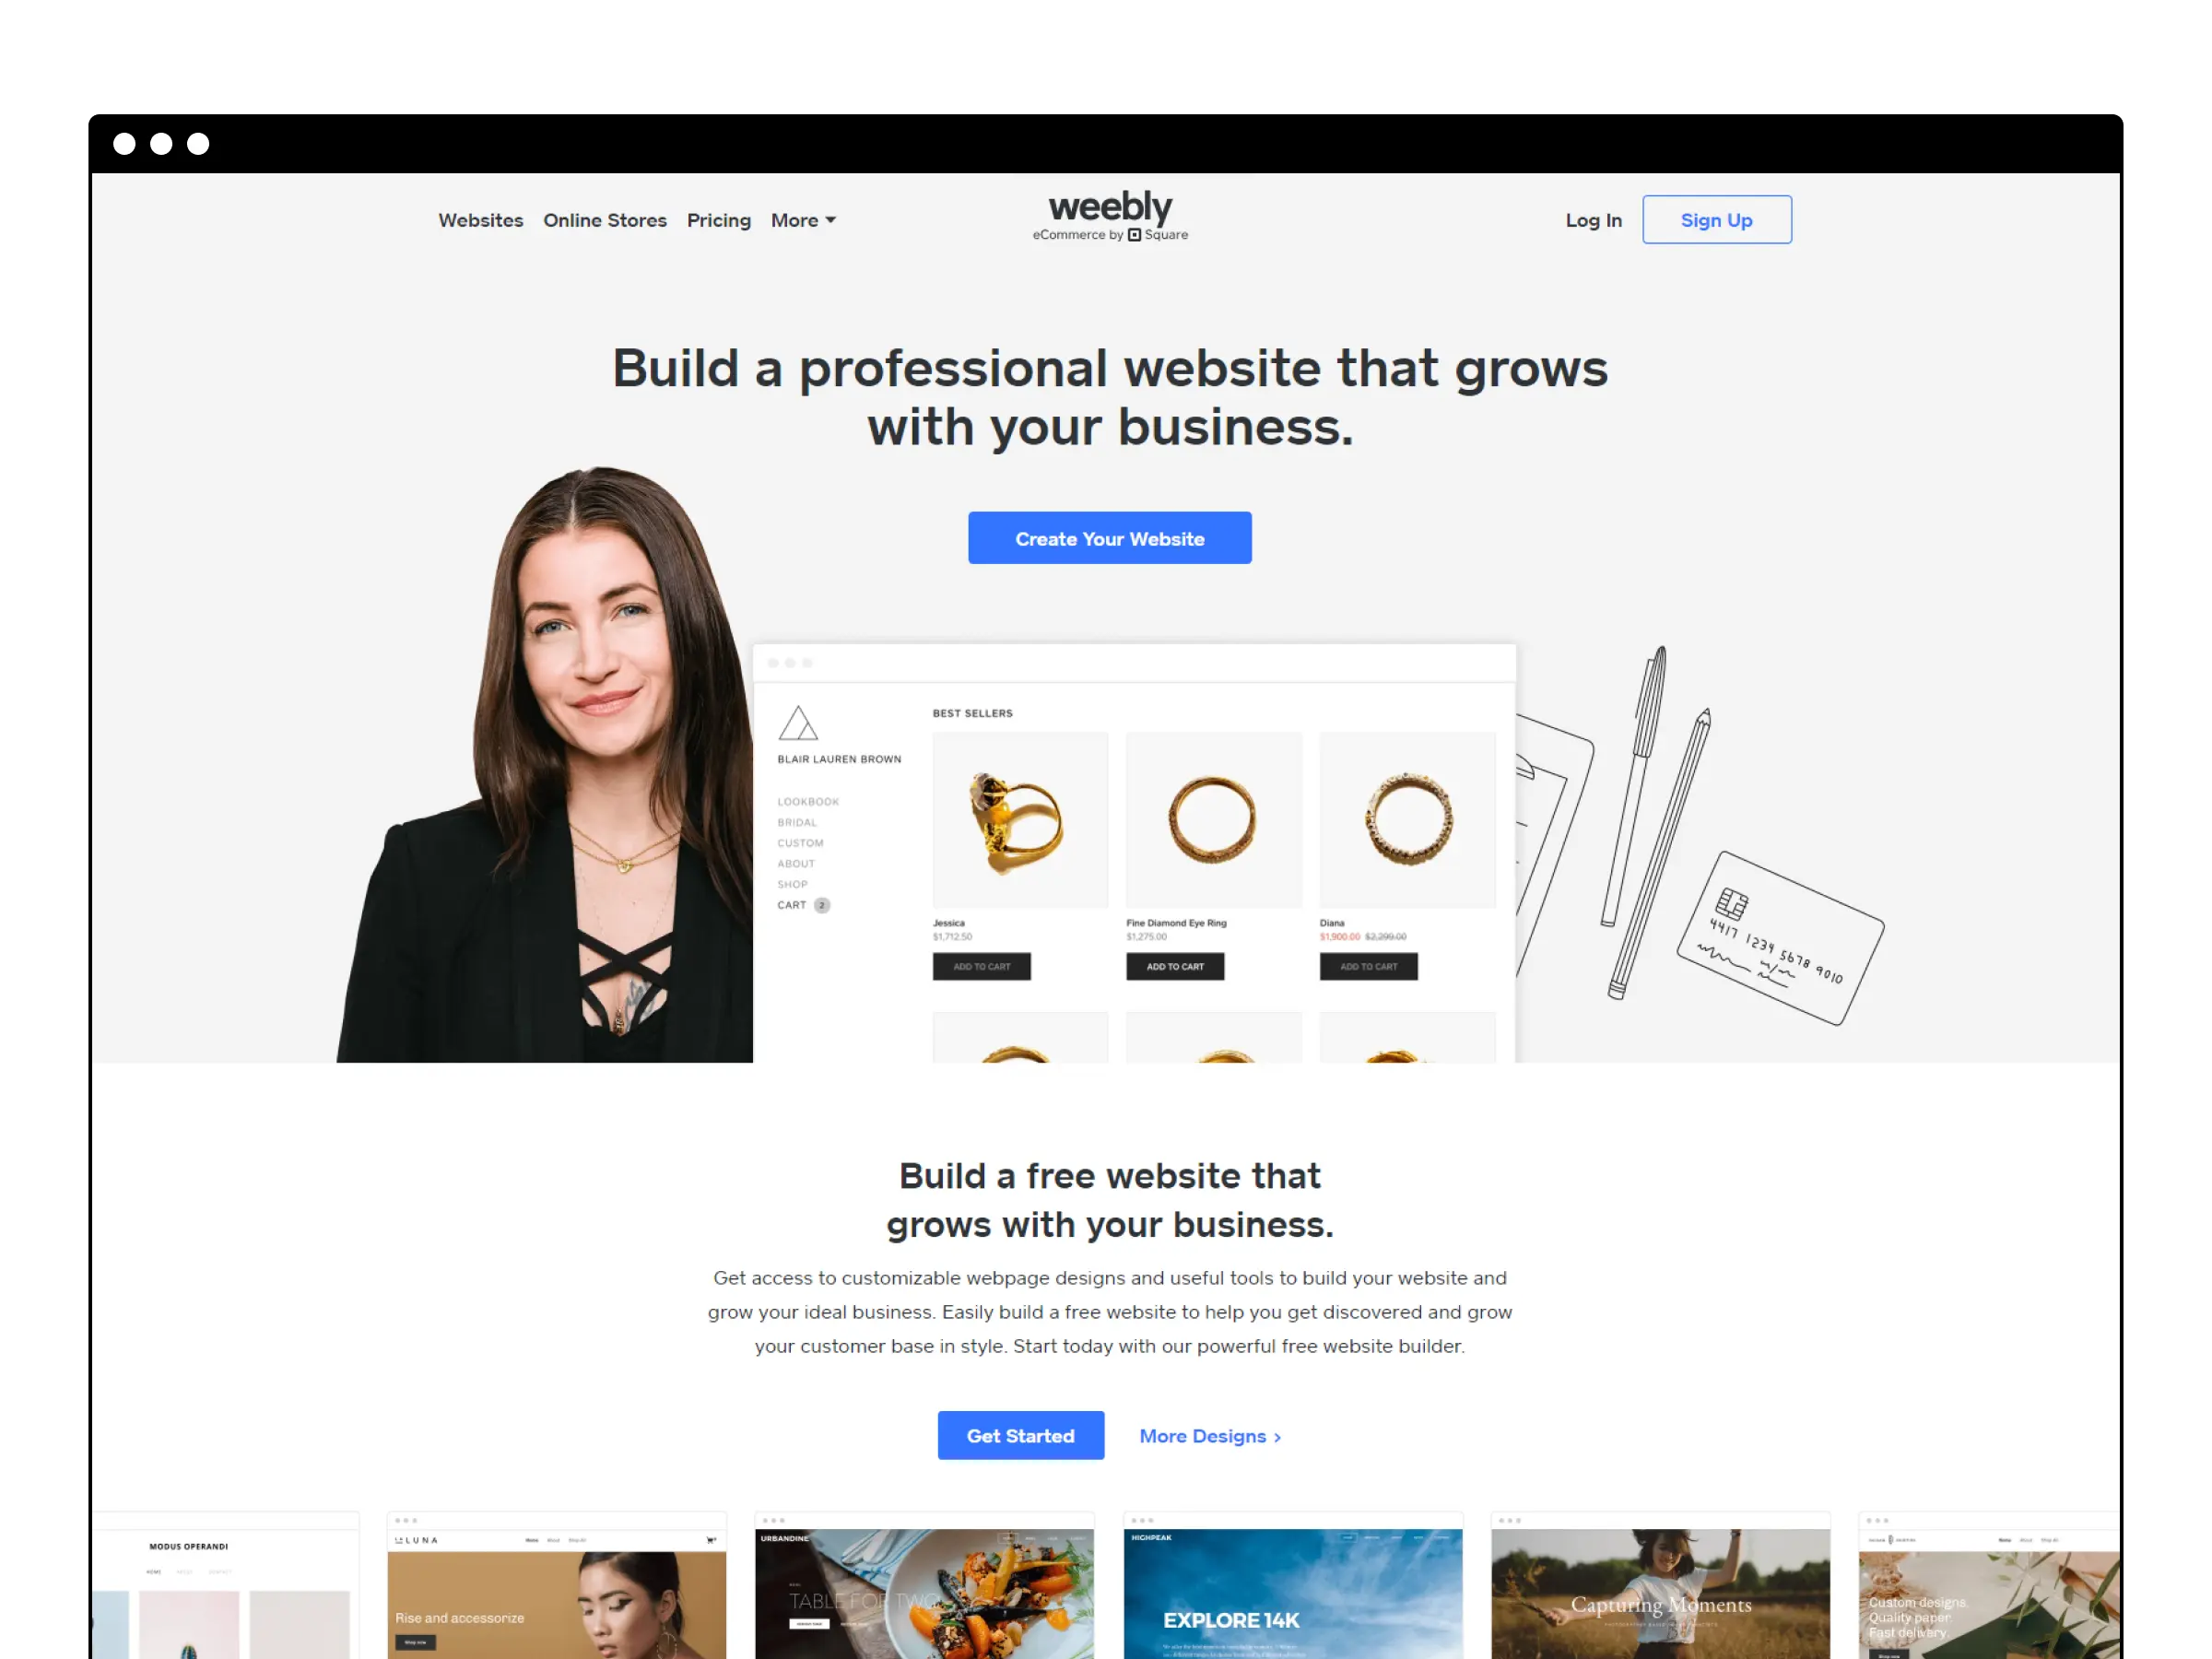 weebly.com homepage screenshot showing a smiling customer and an example website